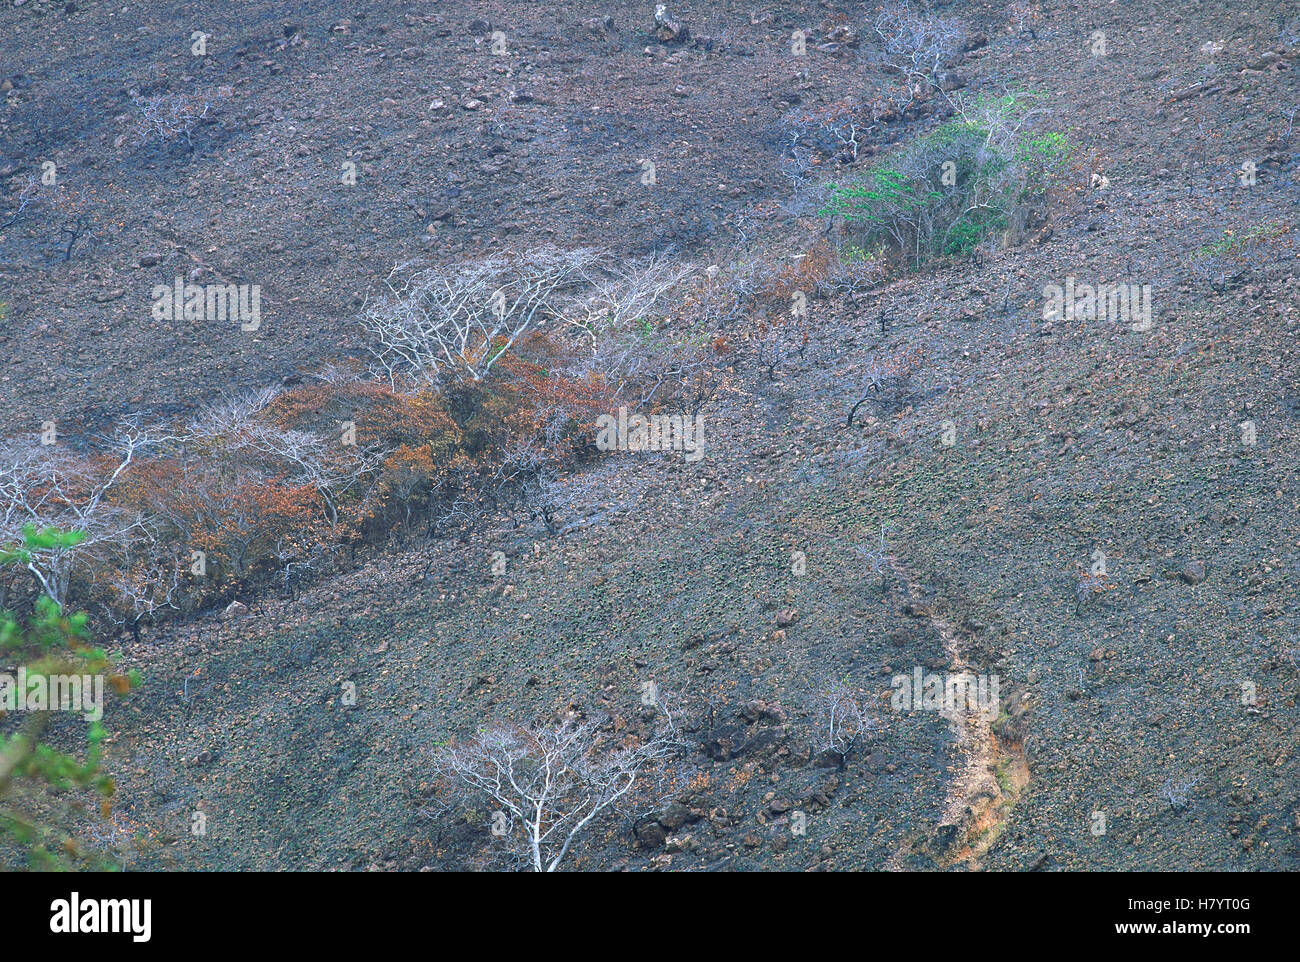 Frequent burning and severe erosion create a desert like landscape, central Panama Stock Photo